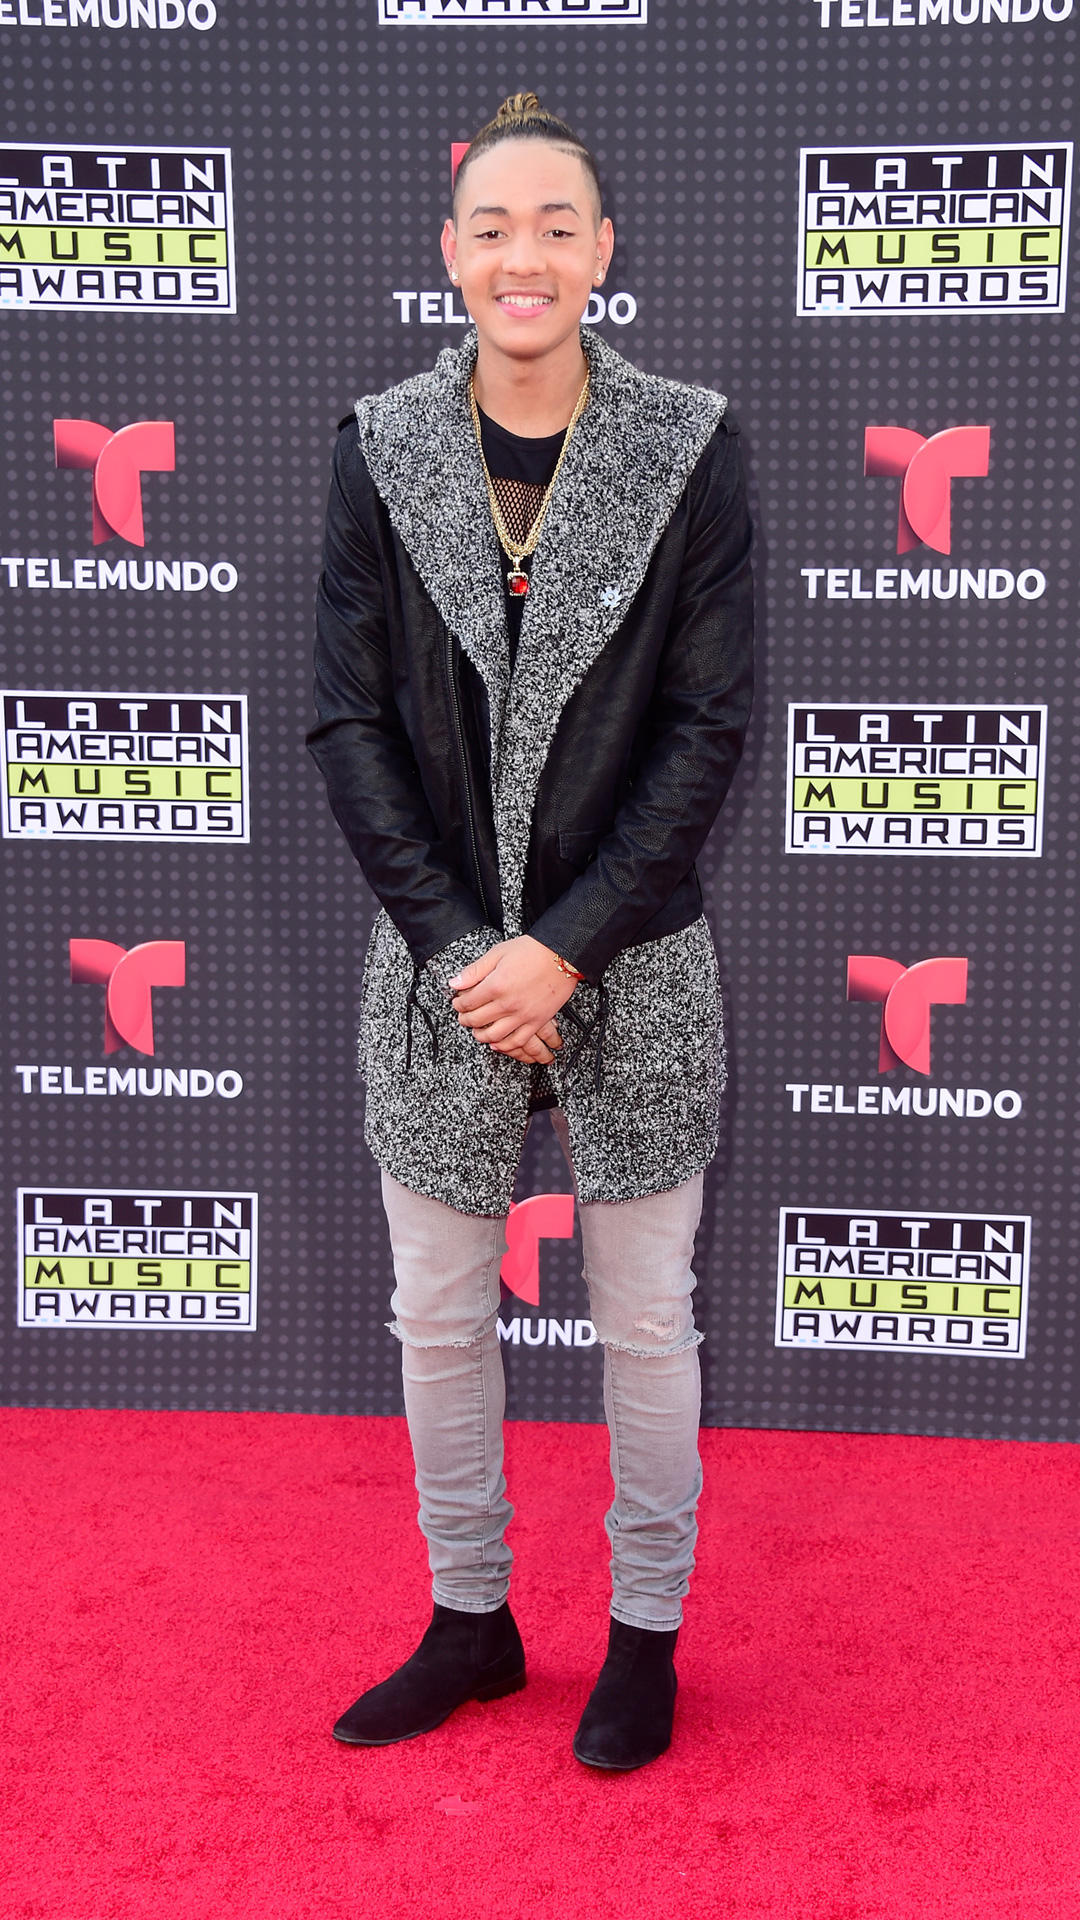 HOLLYWOOD, CA - OCTOBER 08: BB Bronx attends Telemundo's Latin American Music Awards at the Dolby Theatre on October 8, 2015 in Hollywood, California. (Photo by Frazer Harrison/Getty Images)